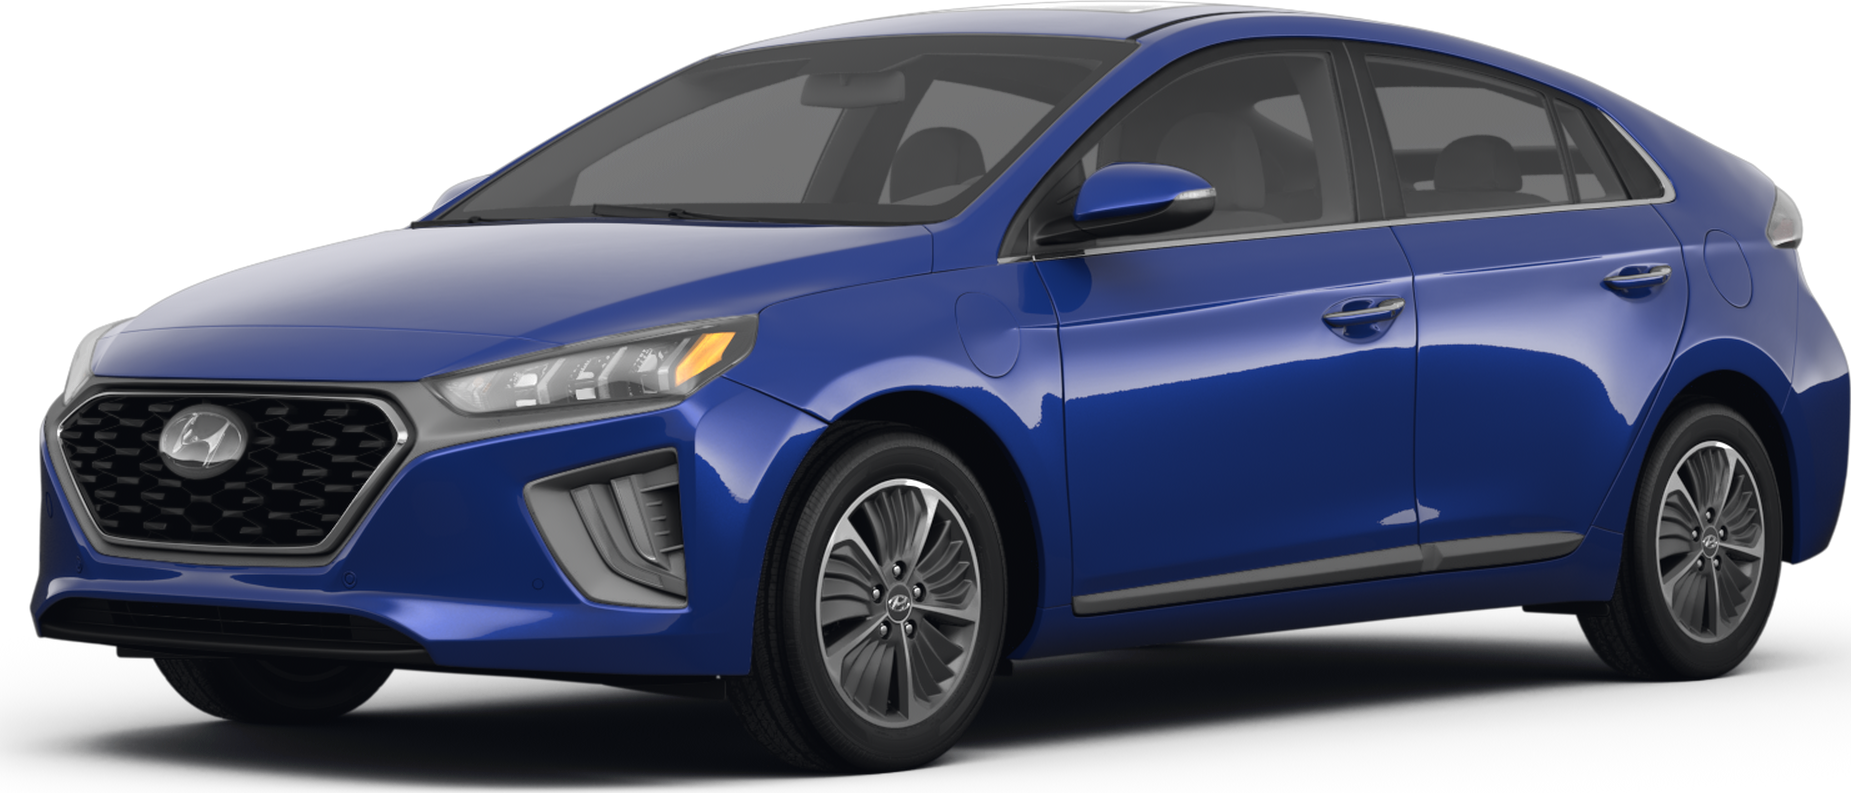 How Much Does A Hyundai Ioniq Battery Cost